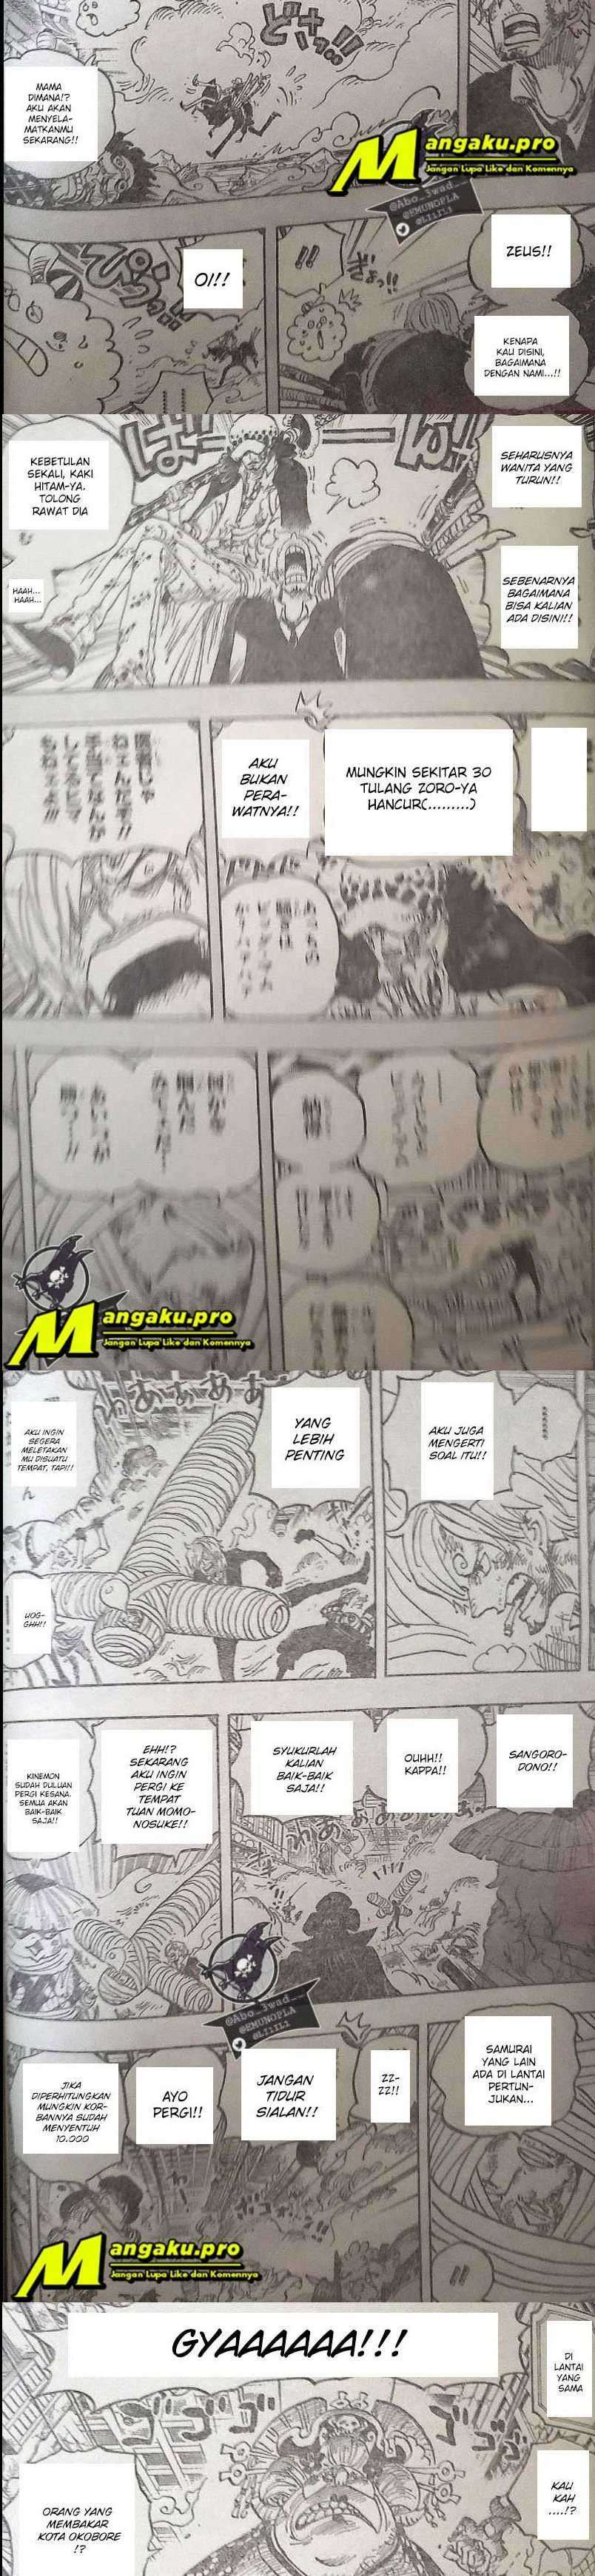 One Piece Chapter 1012 Lq - 43